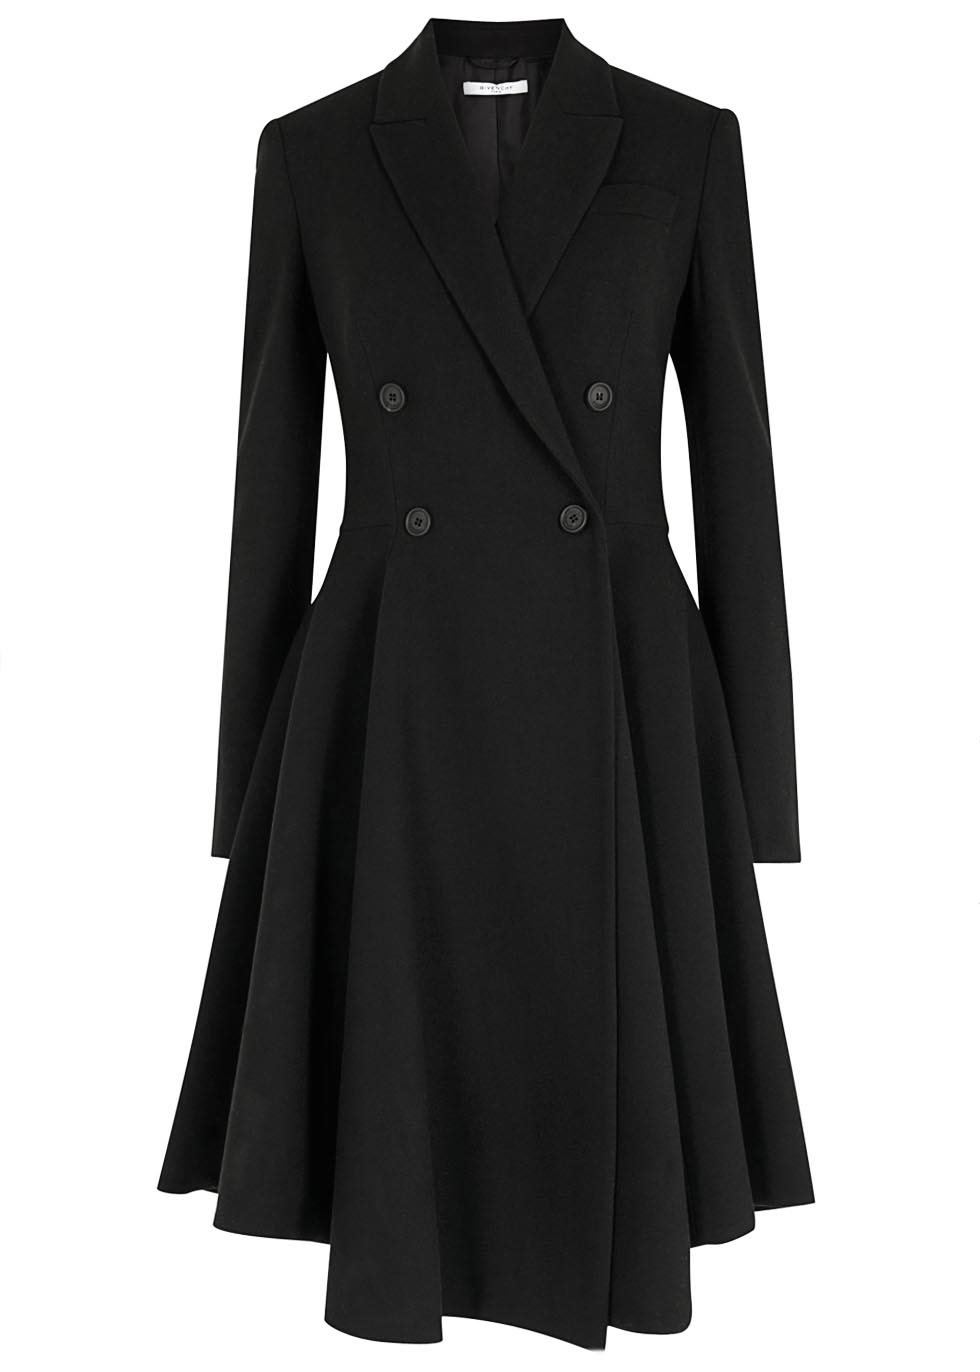 Givenchy Black Double-breasted Flared Wool Coat in Black - Lyst